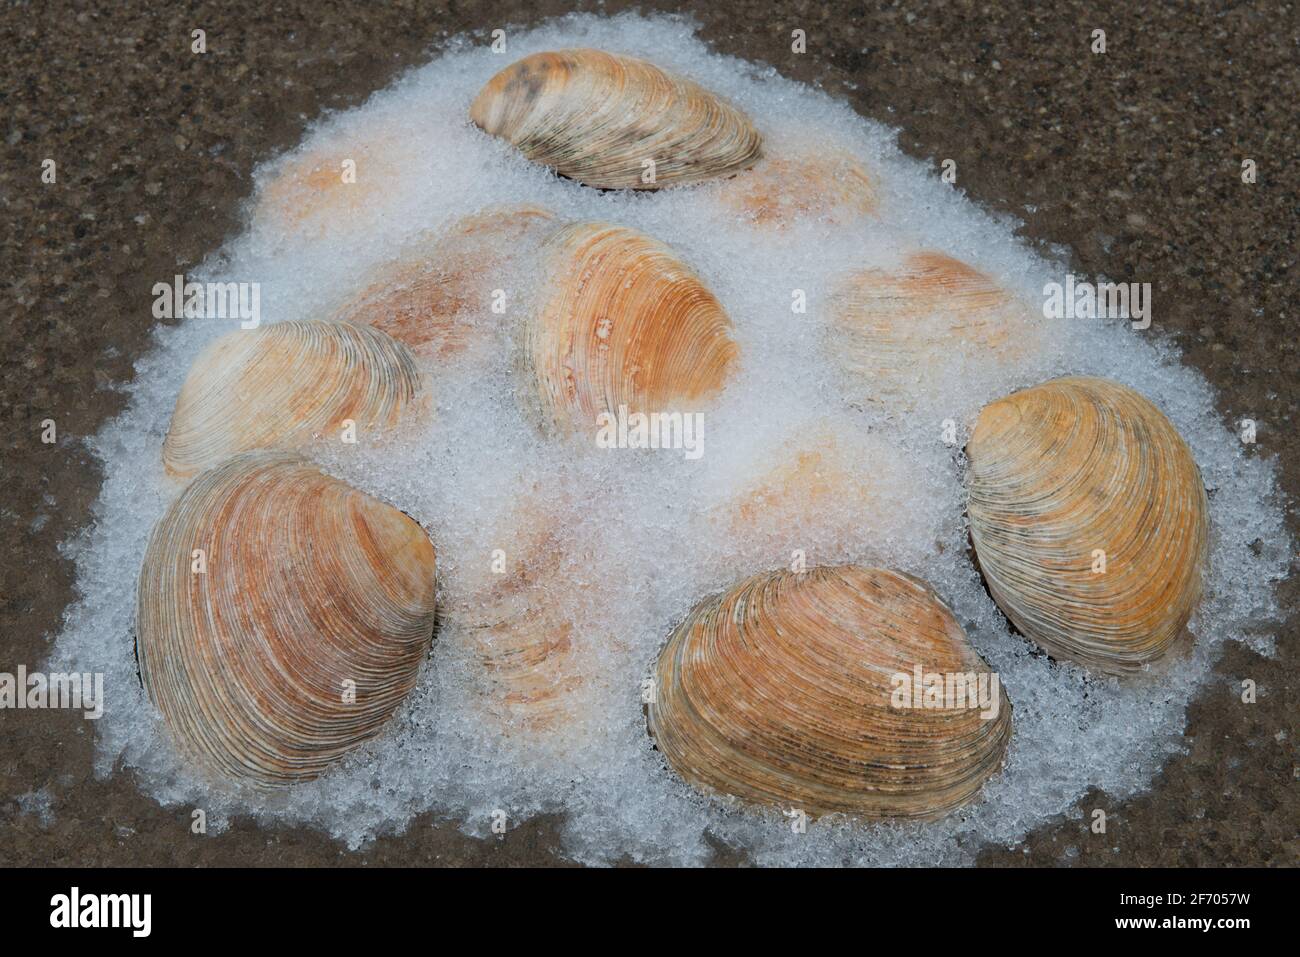 Discarded Clams Emerging From the Melting Snow. Stock Photo